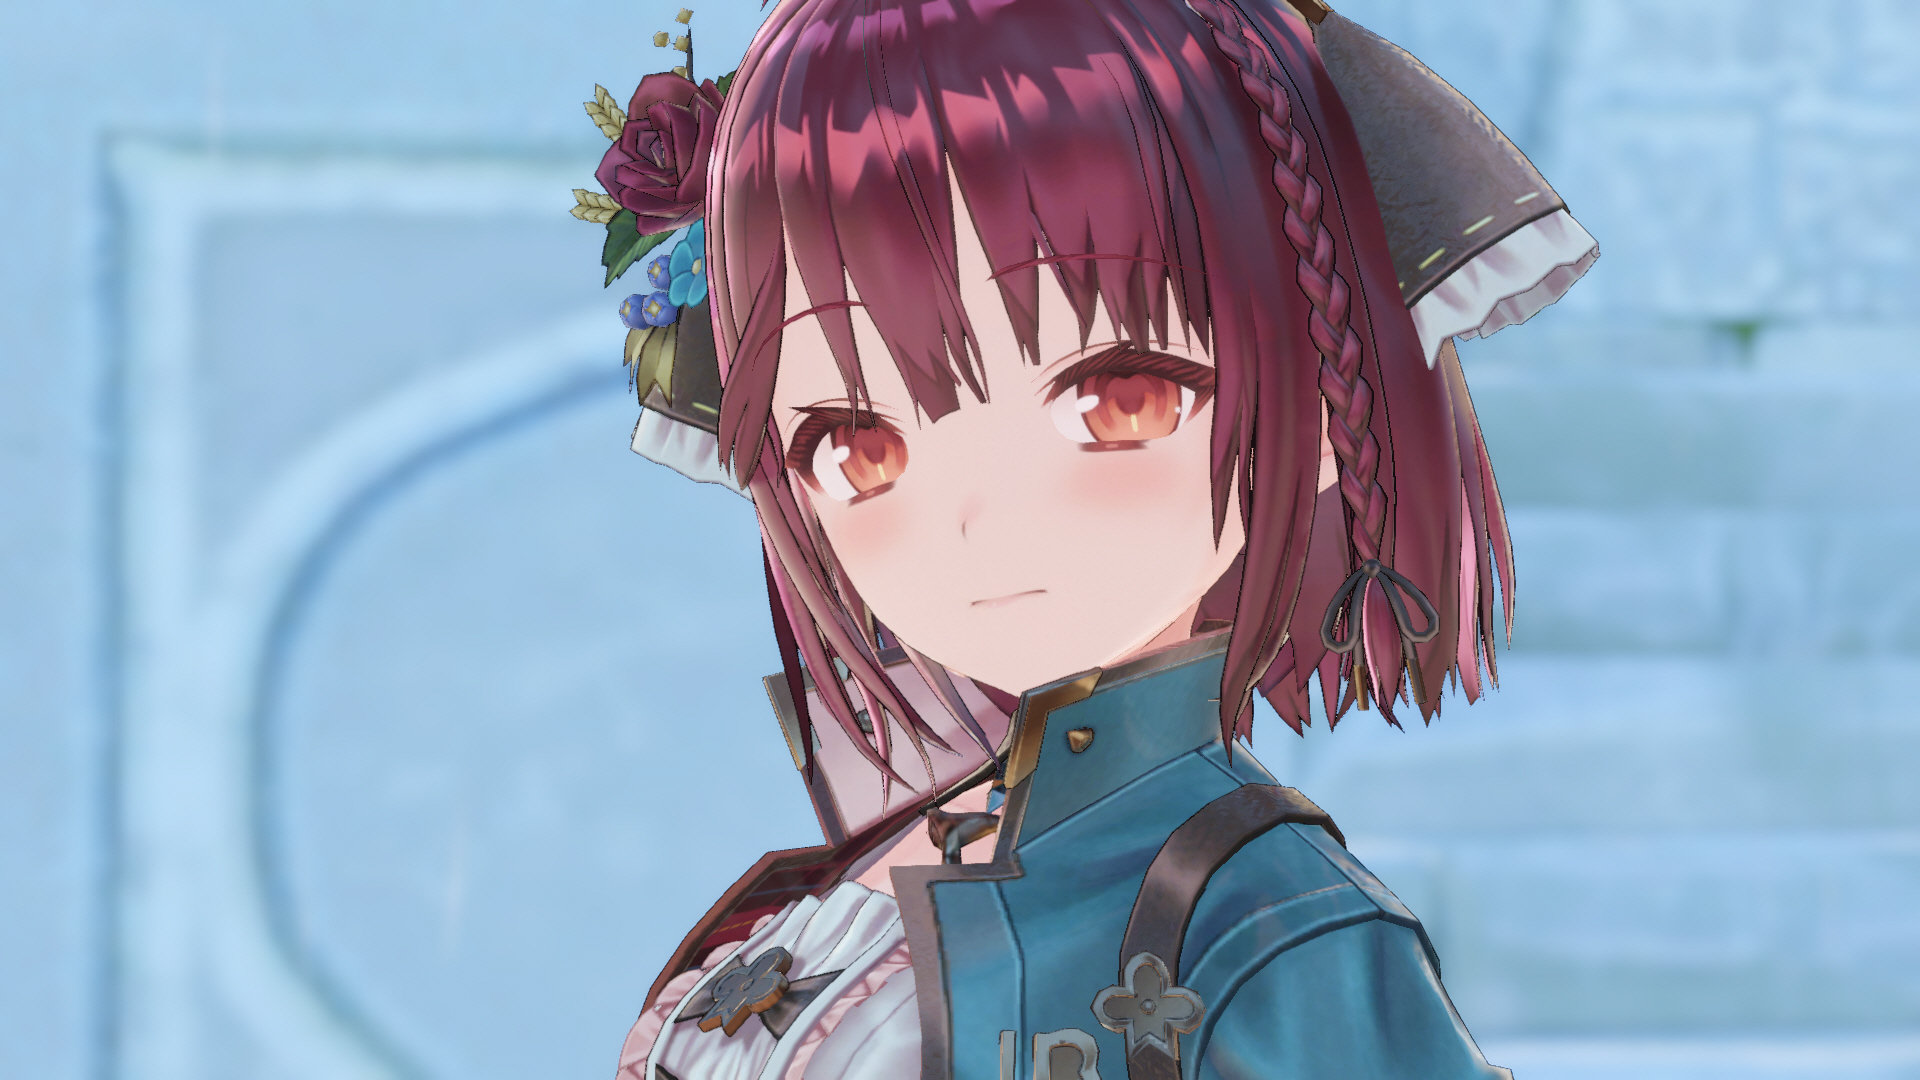 A screenshot depicting Sophie, the protagonist of Atelier Sophie 2: The Alchemist of the Mysterious Dream. She has red hair tucked within a blue and brown bandanna.